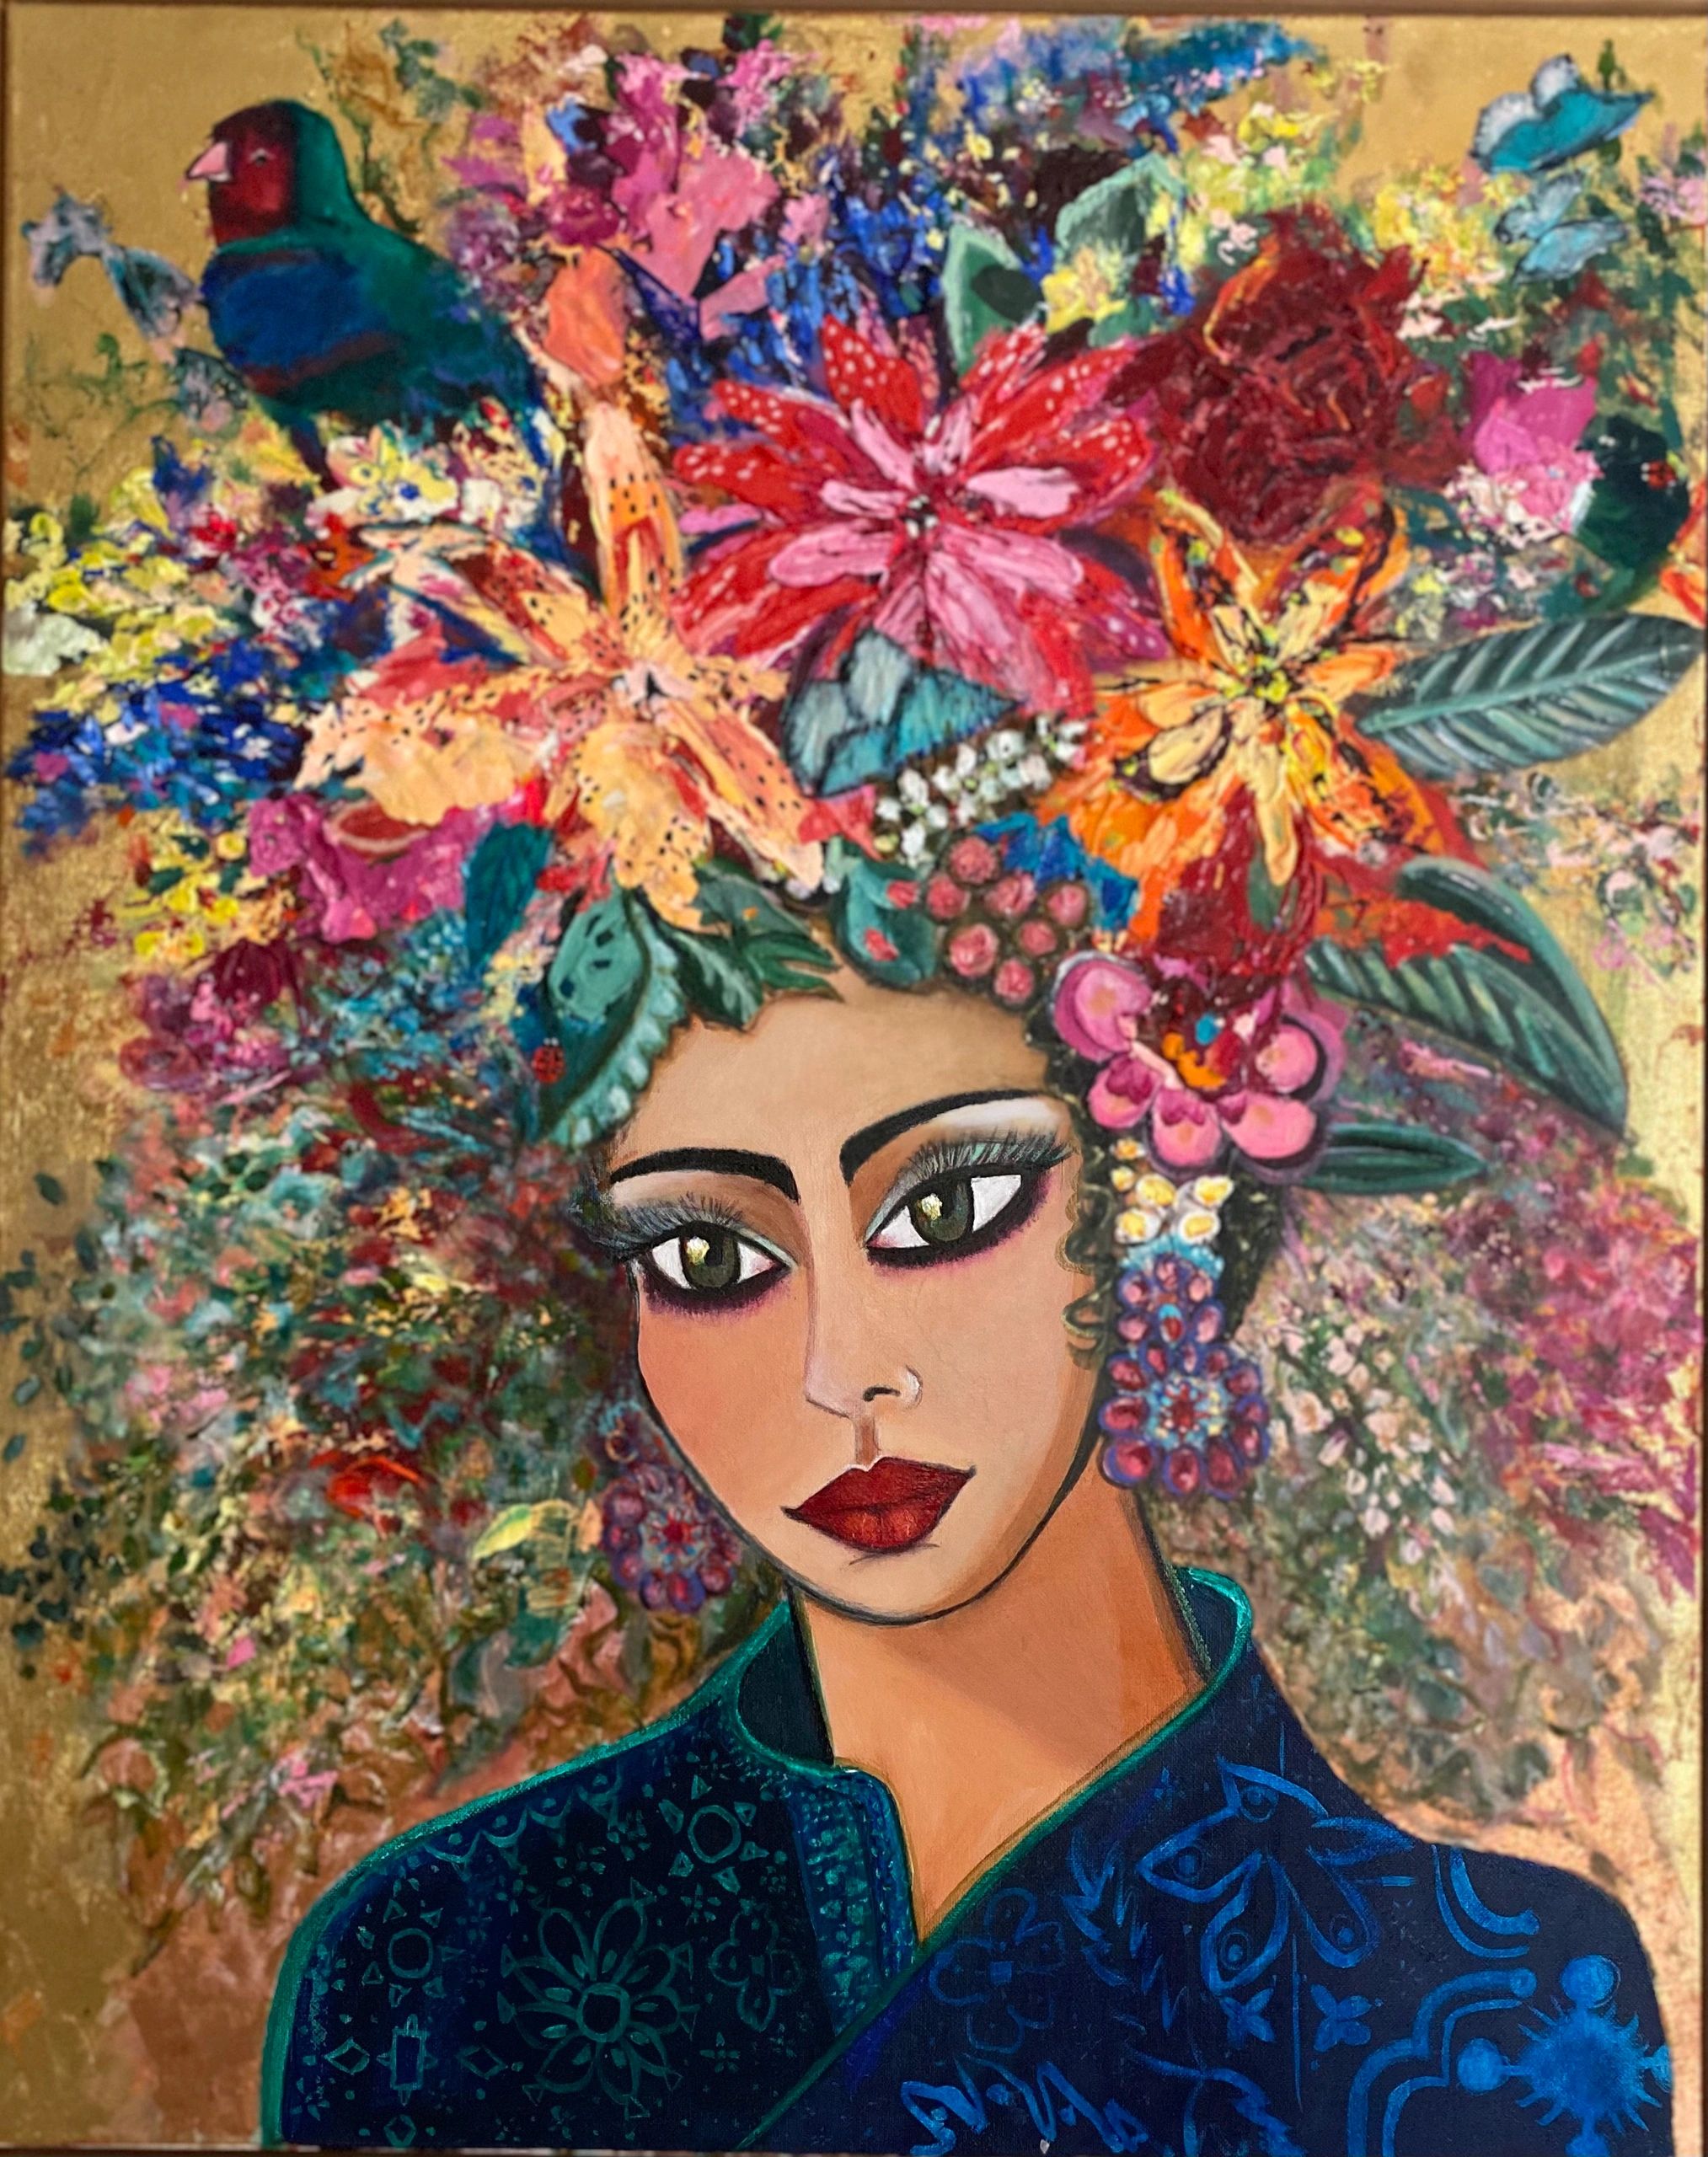 Painting of a Female with colourful textured flowers and a bird in her hair.